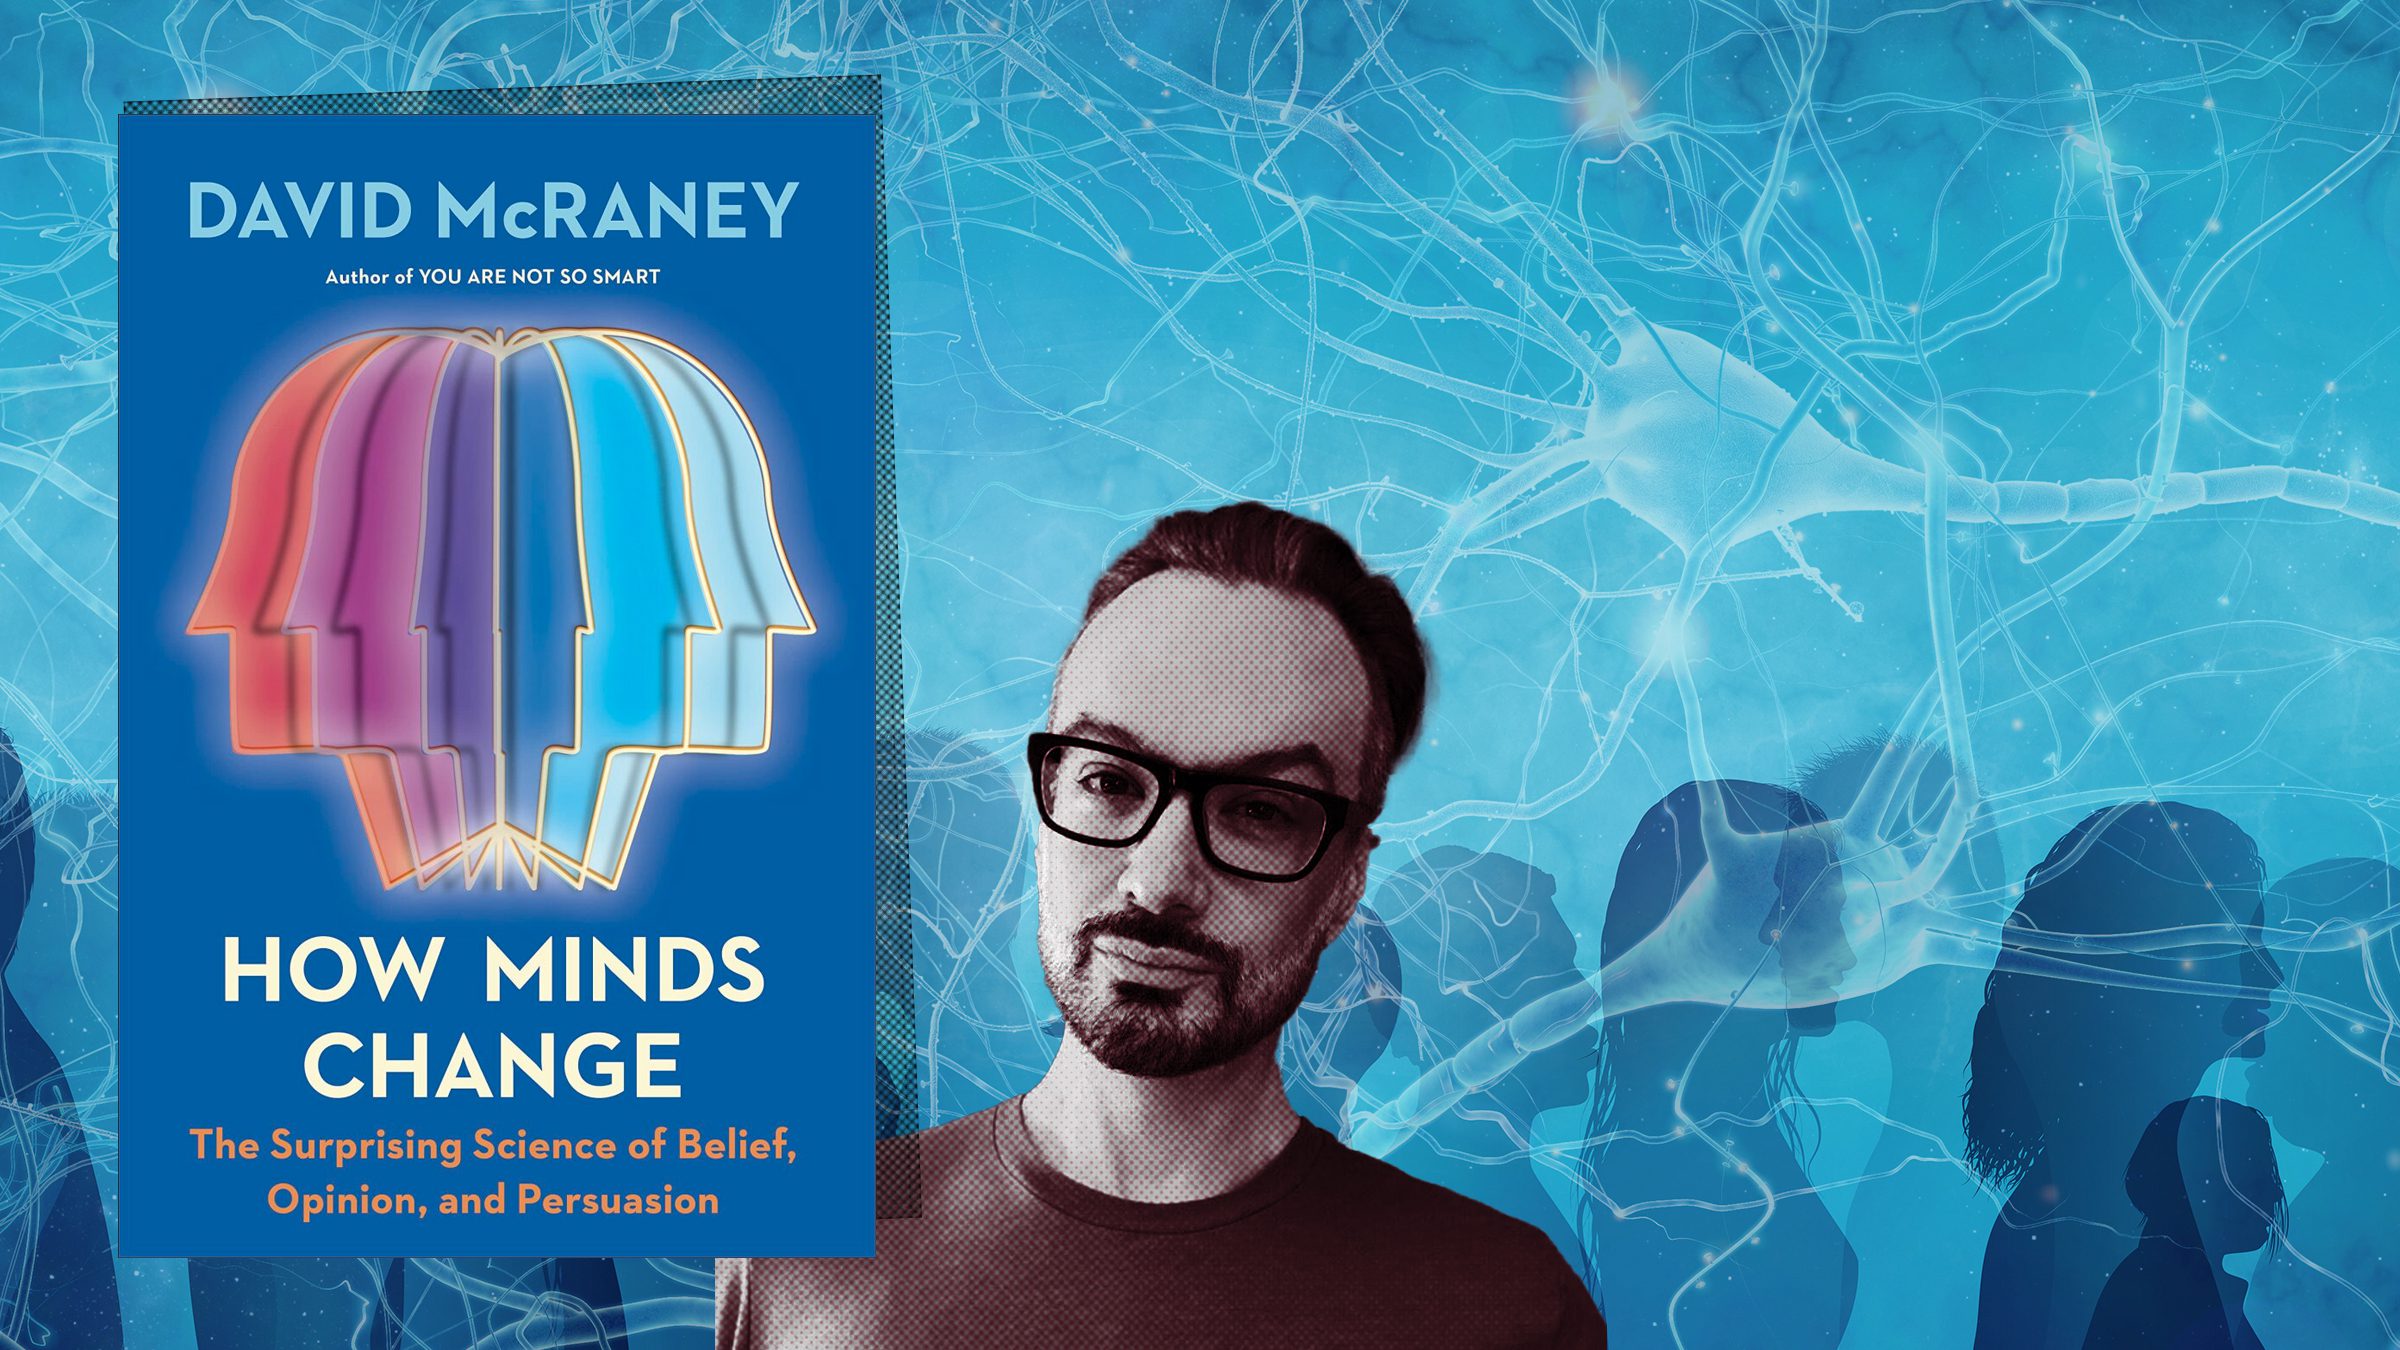 John Donvan In Conversation with David McRaney on the Science of Changing Minds